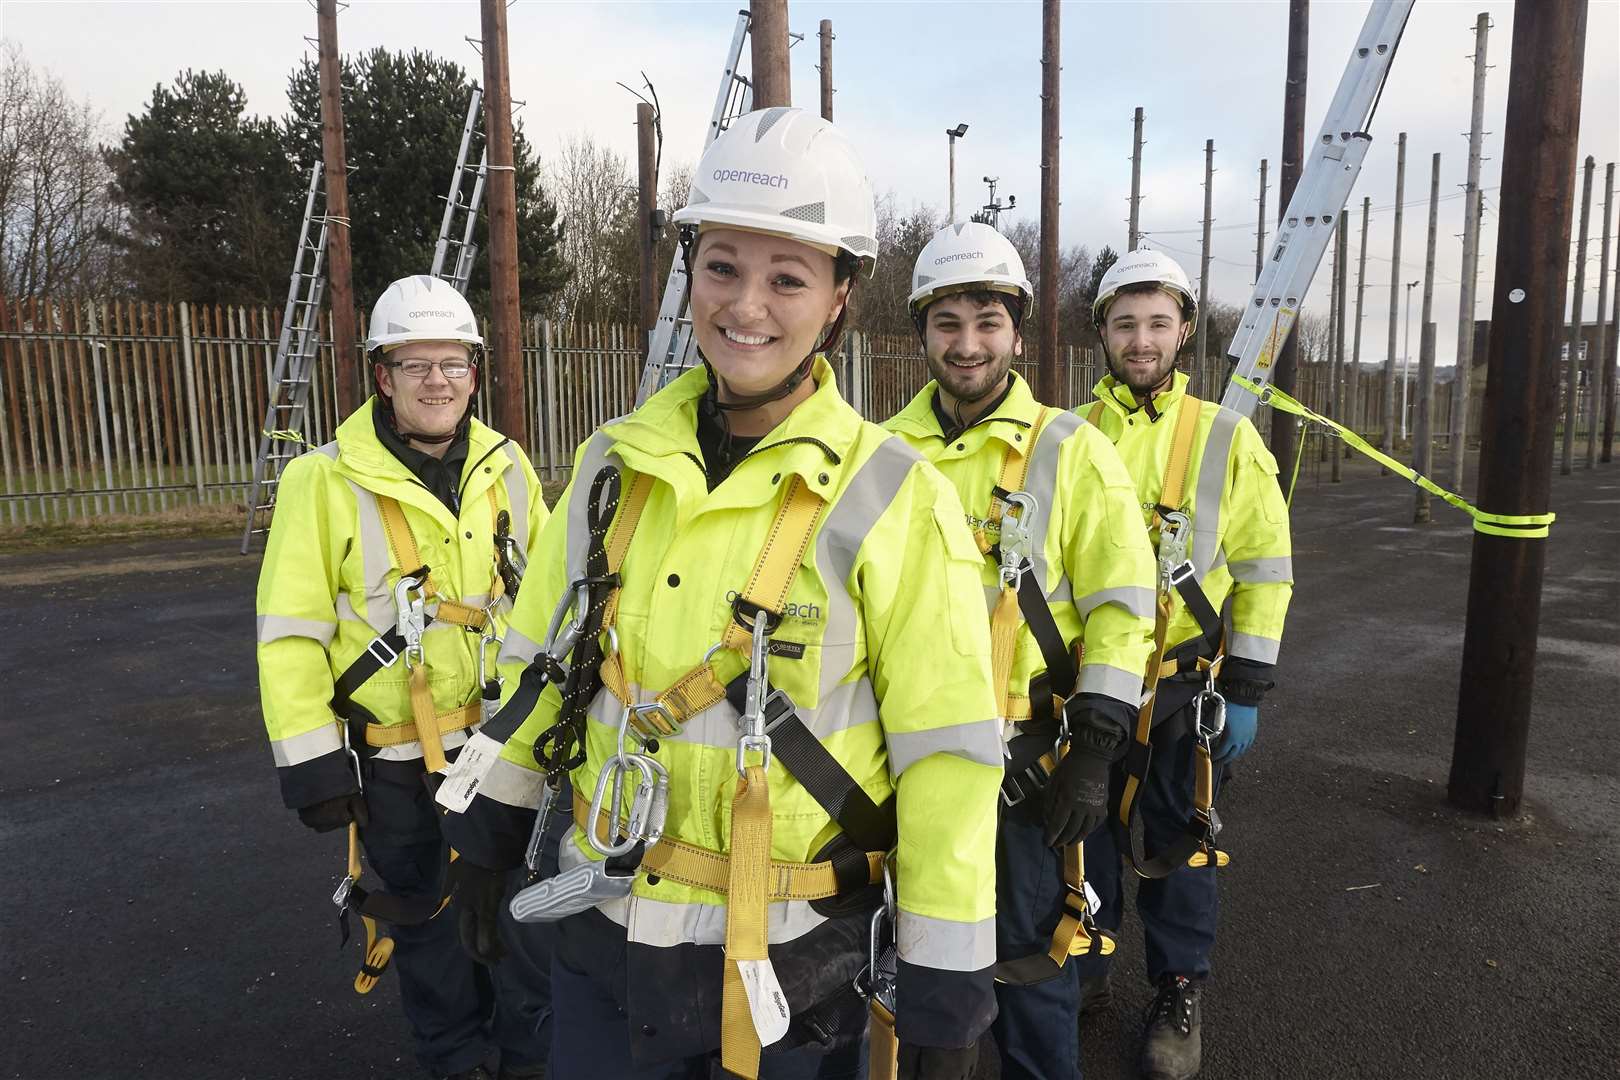 Getting ready to play their part in helping keep the country connected are Openreach apprentices (from left) Shaun Steward, Emily Wardle, Liam Guardascione and James Redman. Picture: Openreach